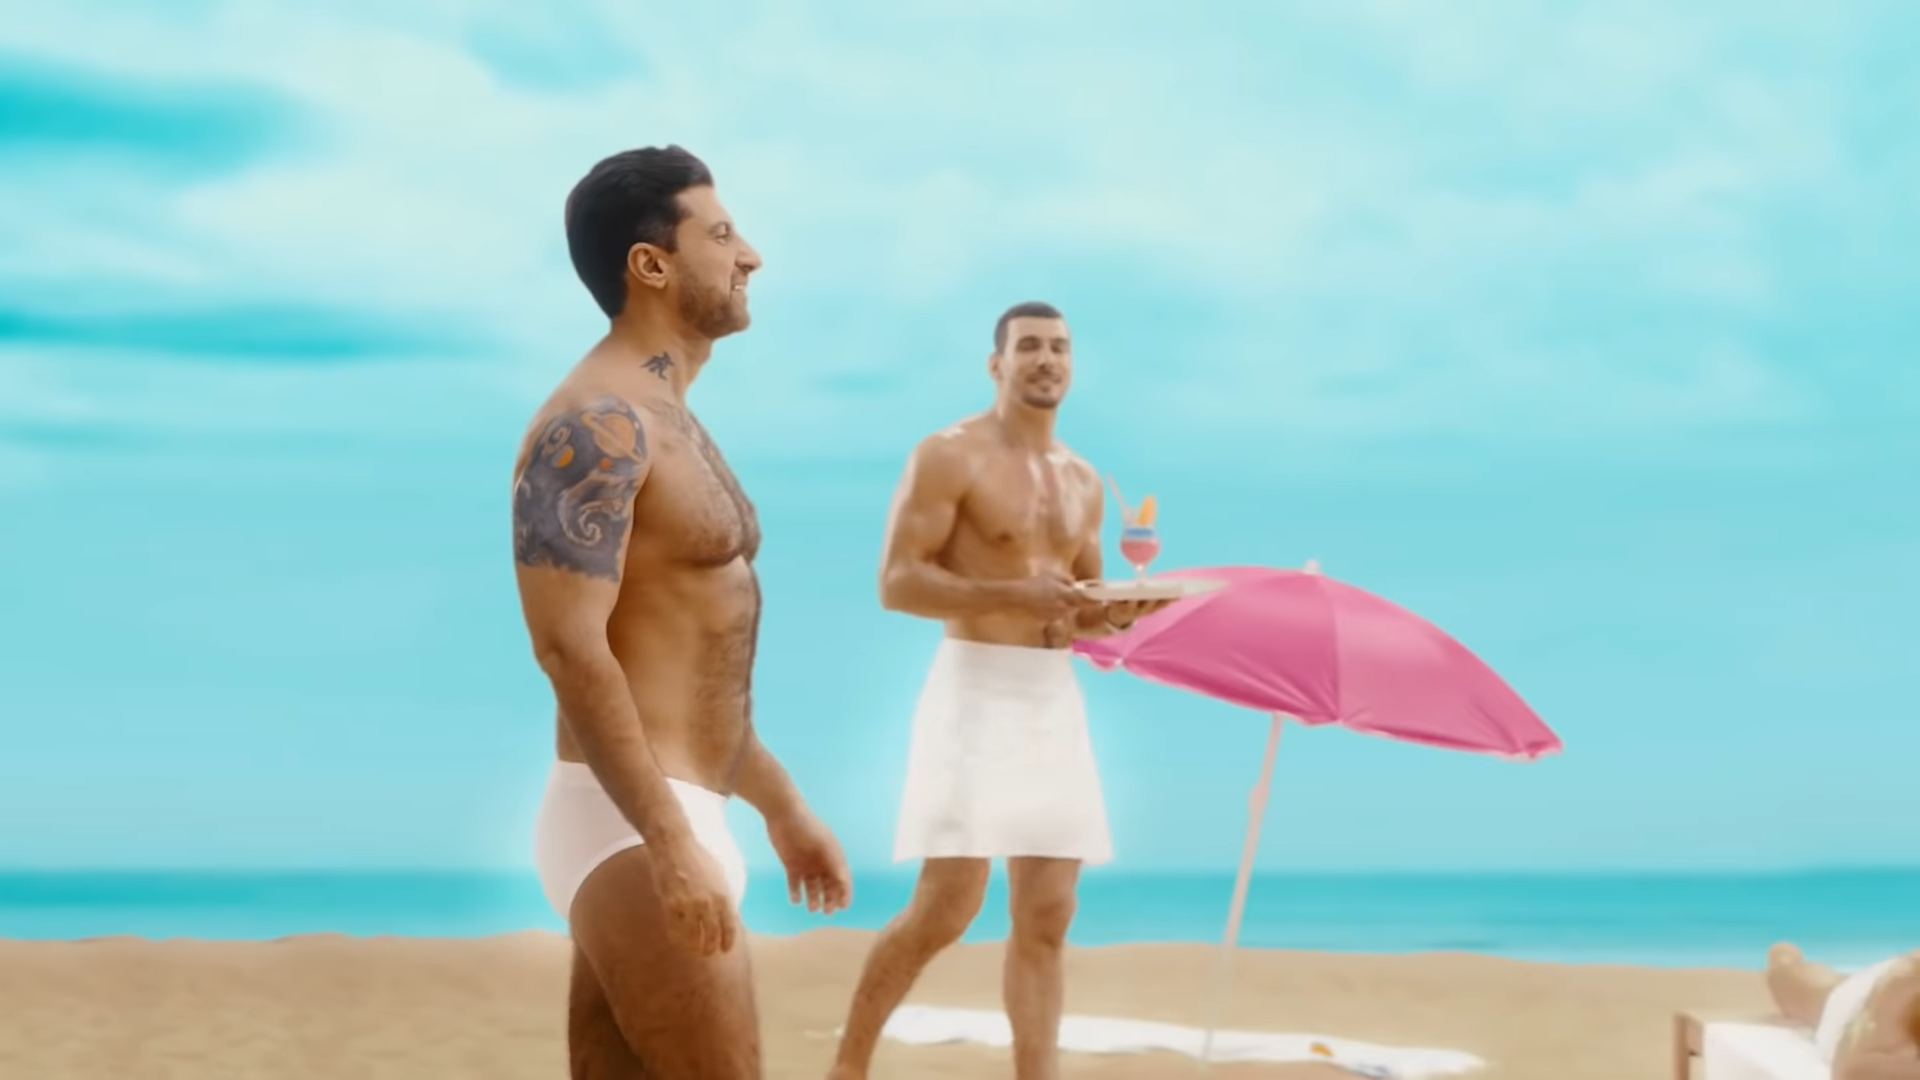 The Russian TV show "I'm Not Gay" reaches for homophobia and grabs homoerotica.